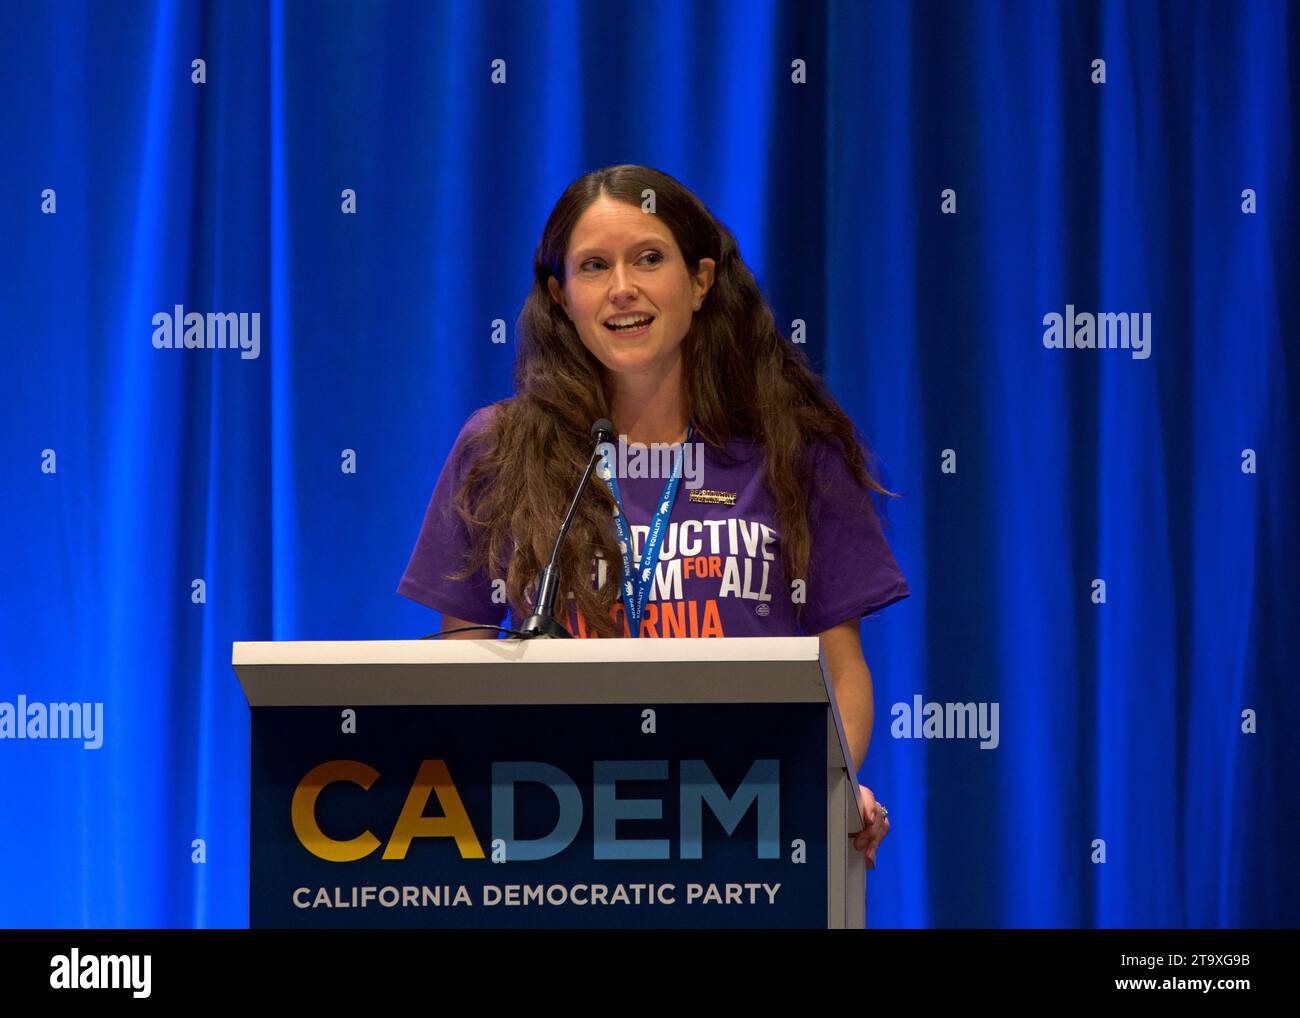 Sacramento, CA - Nov 17, 2023: Shannon Olivieri Hovis speaking at the Women's Caucus meeting at the CADEM Endorsing Convention in the Sacramento Conve Stock Photo